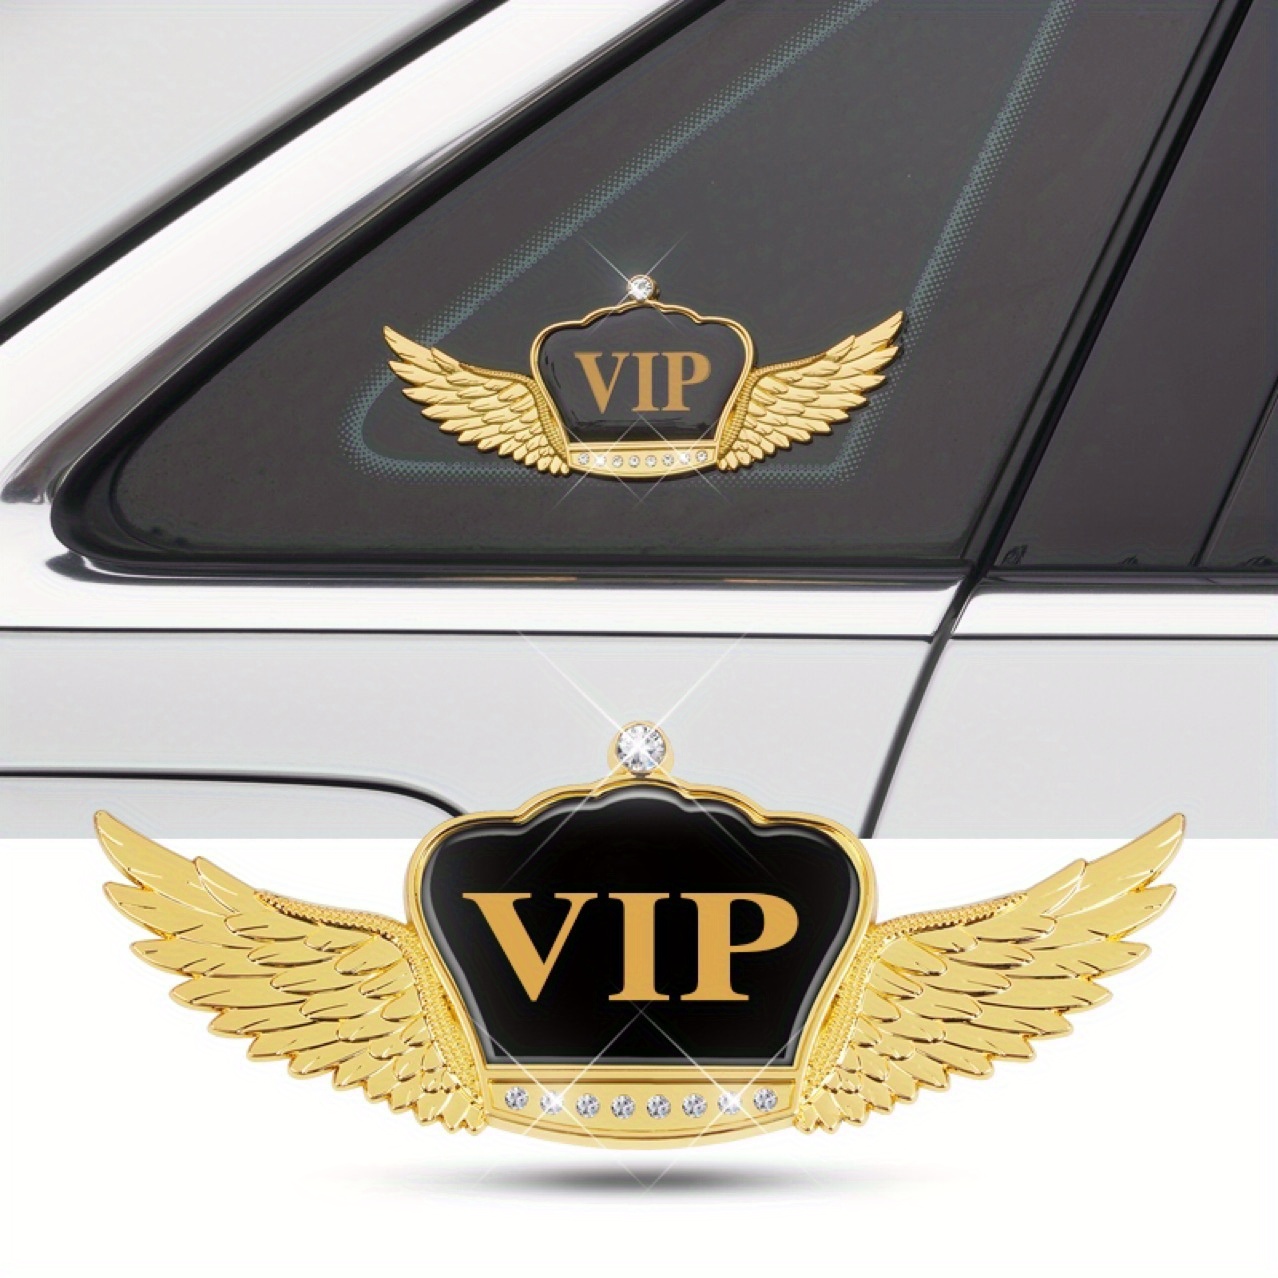 

Vip Wheat Ear Metal Car Logo Stickers - Fit For Hood & Window Decoration, Enhance Your Vehicle's Look